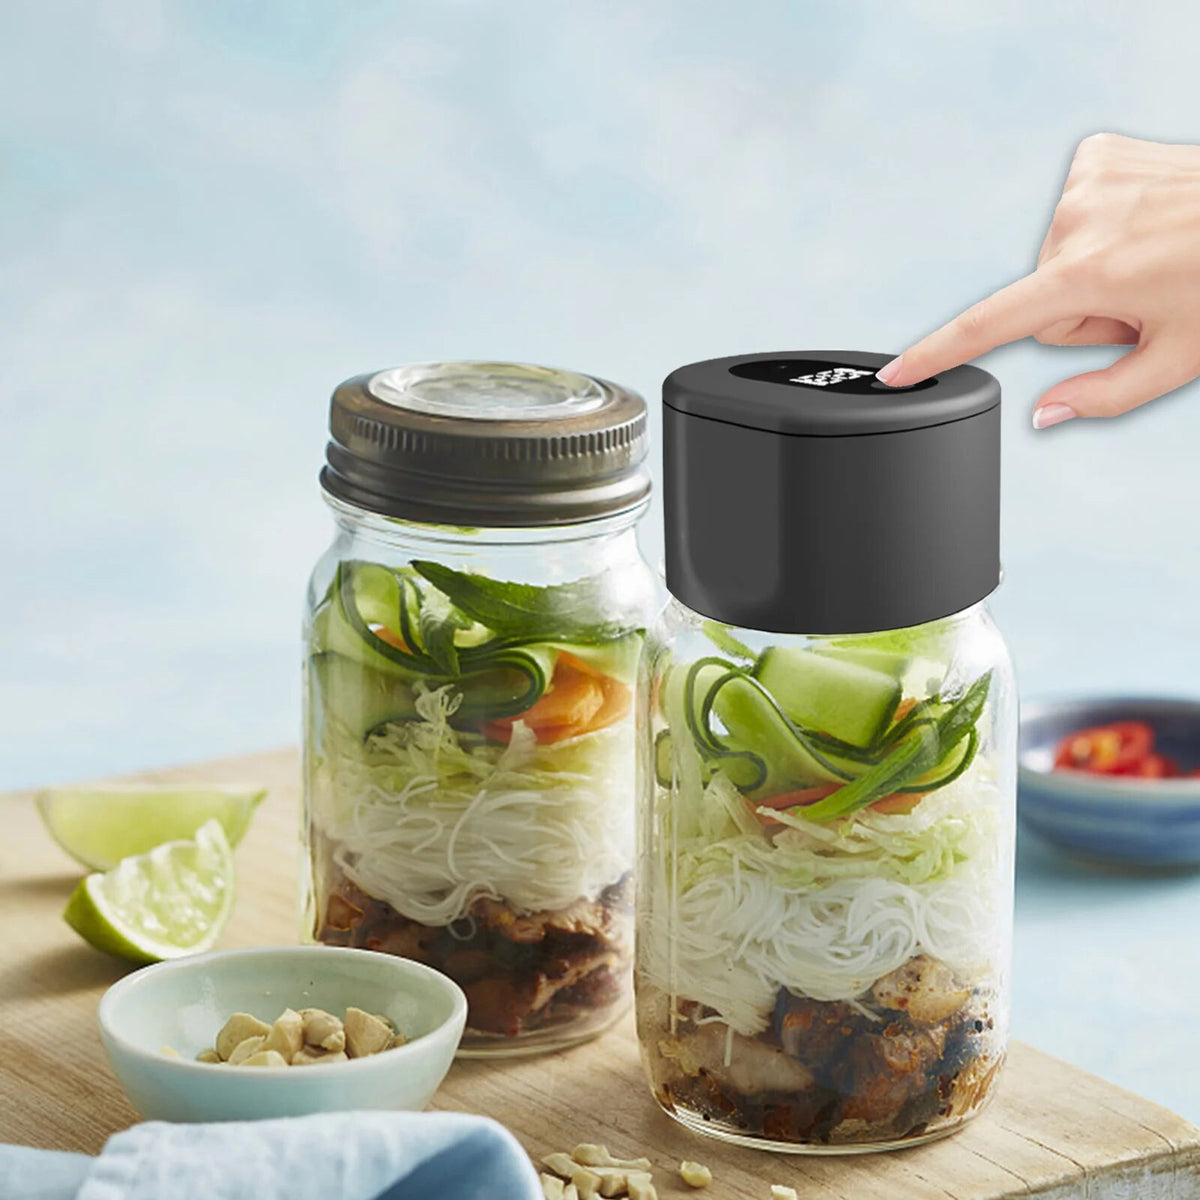 Now + Free gift: 5 Large Lids &amp; 5 Small Lids| Easy, compact and Hassle-free Jar Sealer | Works with All normal lids - WOWGOOD